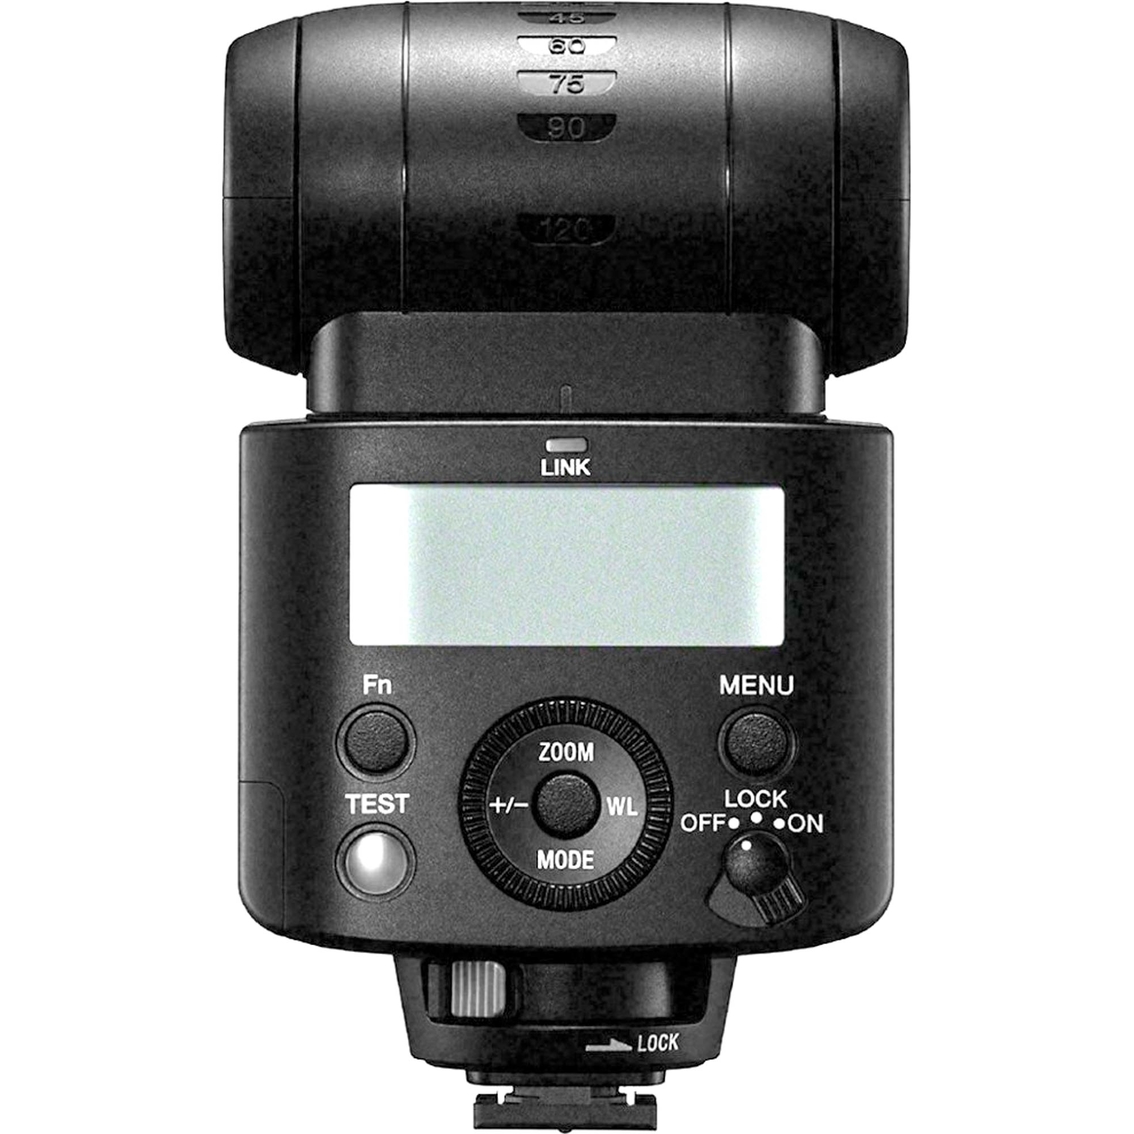 Sony External Camera Flash HVL-F45RM - Image 3 of 5